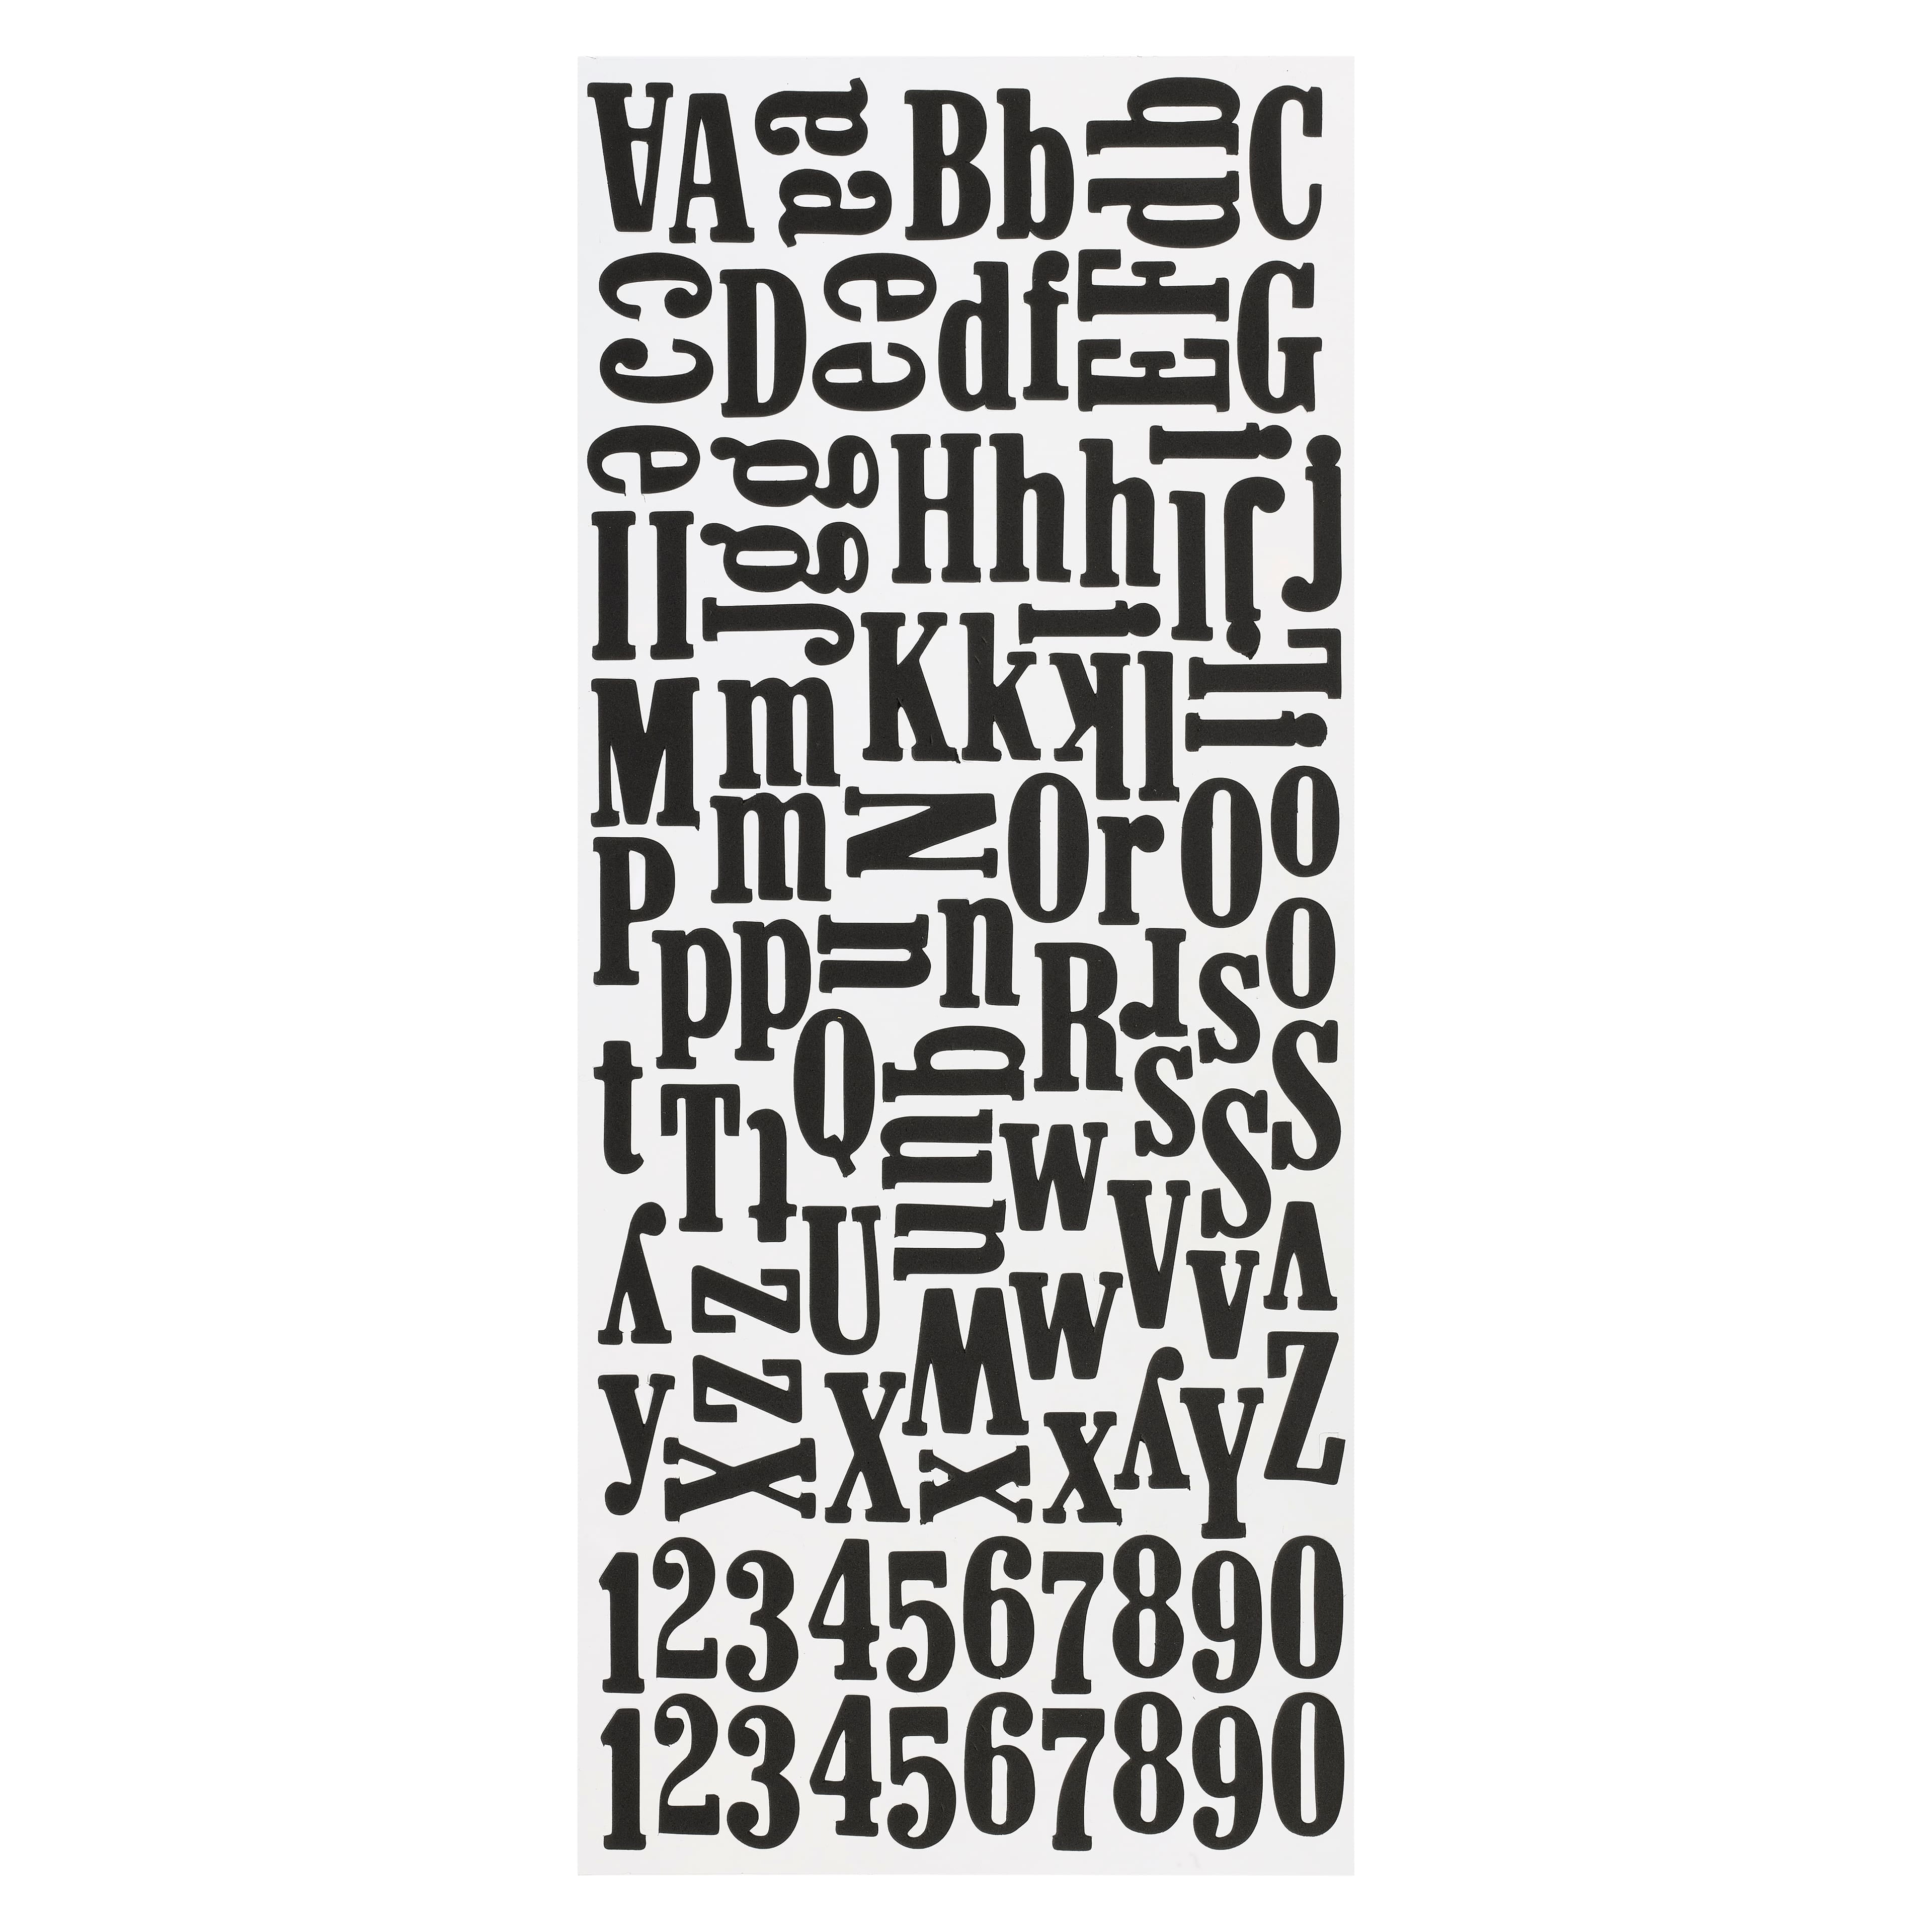 12 Pack: Black Small Font Alphabet Stickers by Recollections™